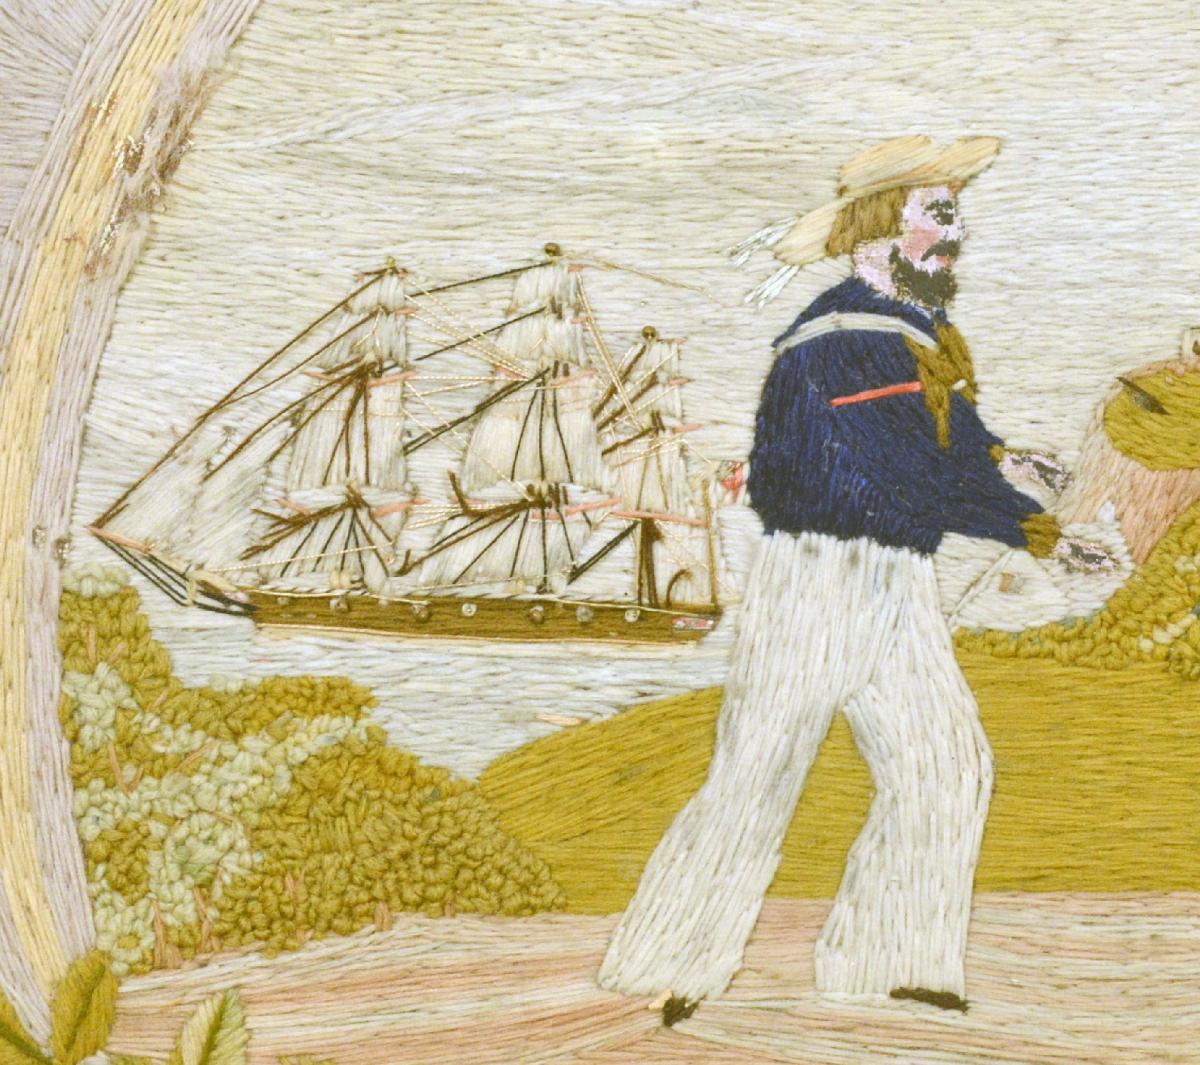 British Sailor's Woolwork of The Sailor's Return, Circa 1880